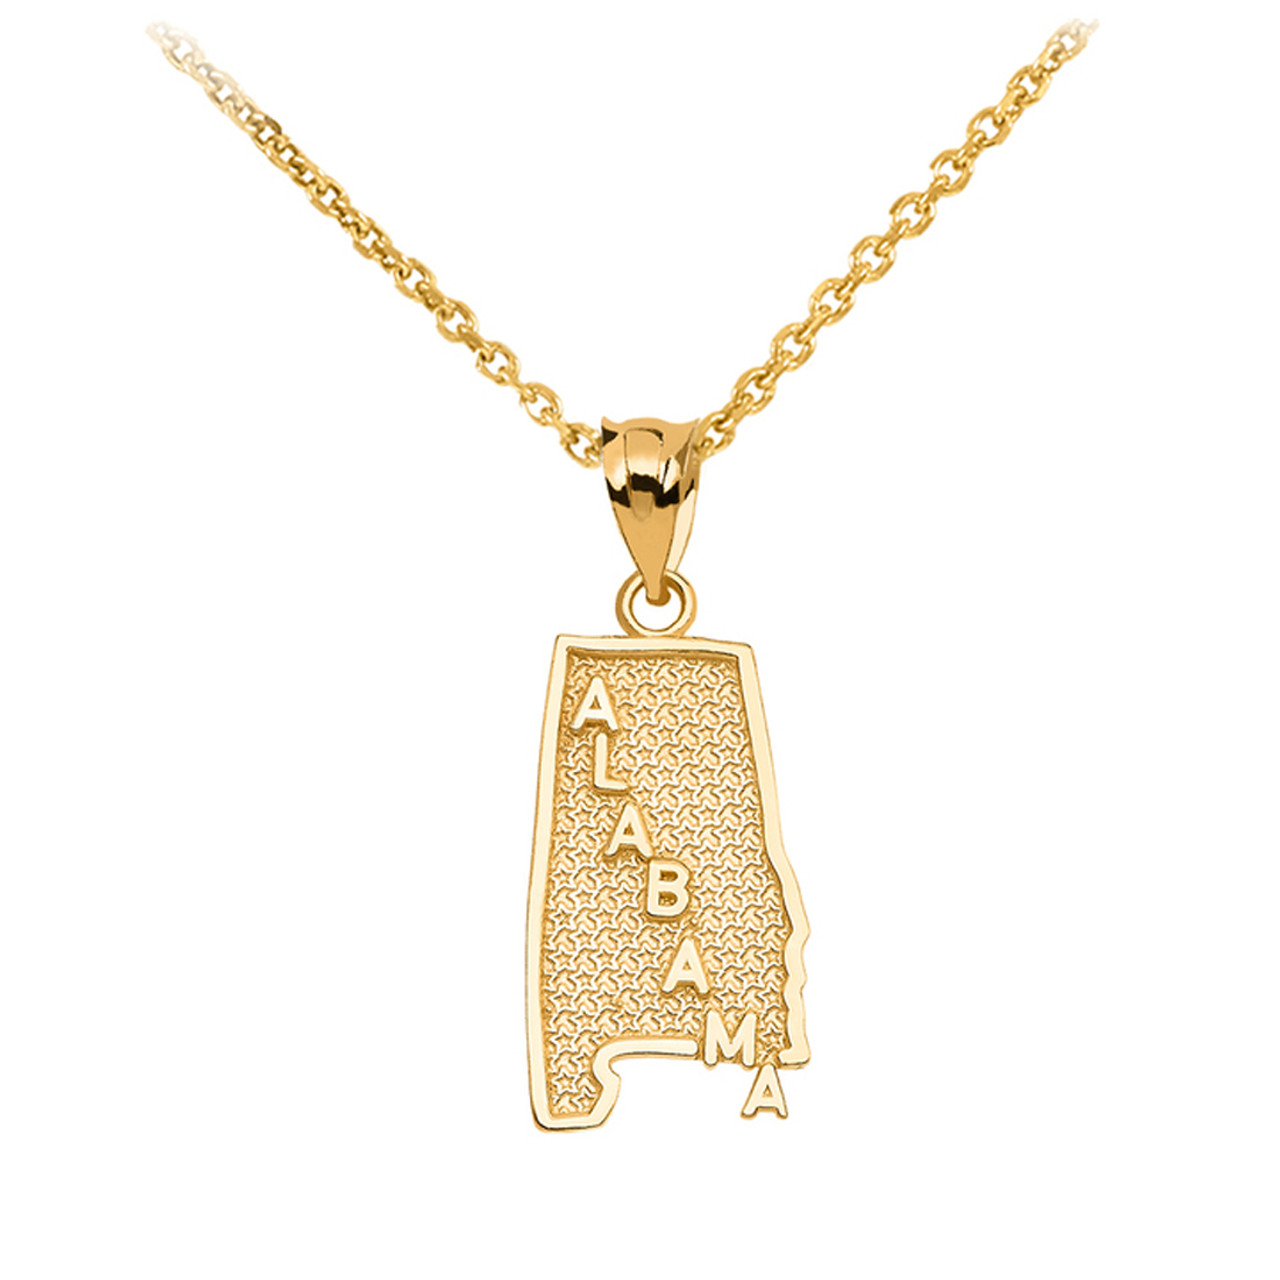 Oregon US State Map Charm Pendant in 10k Yellow Gold 